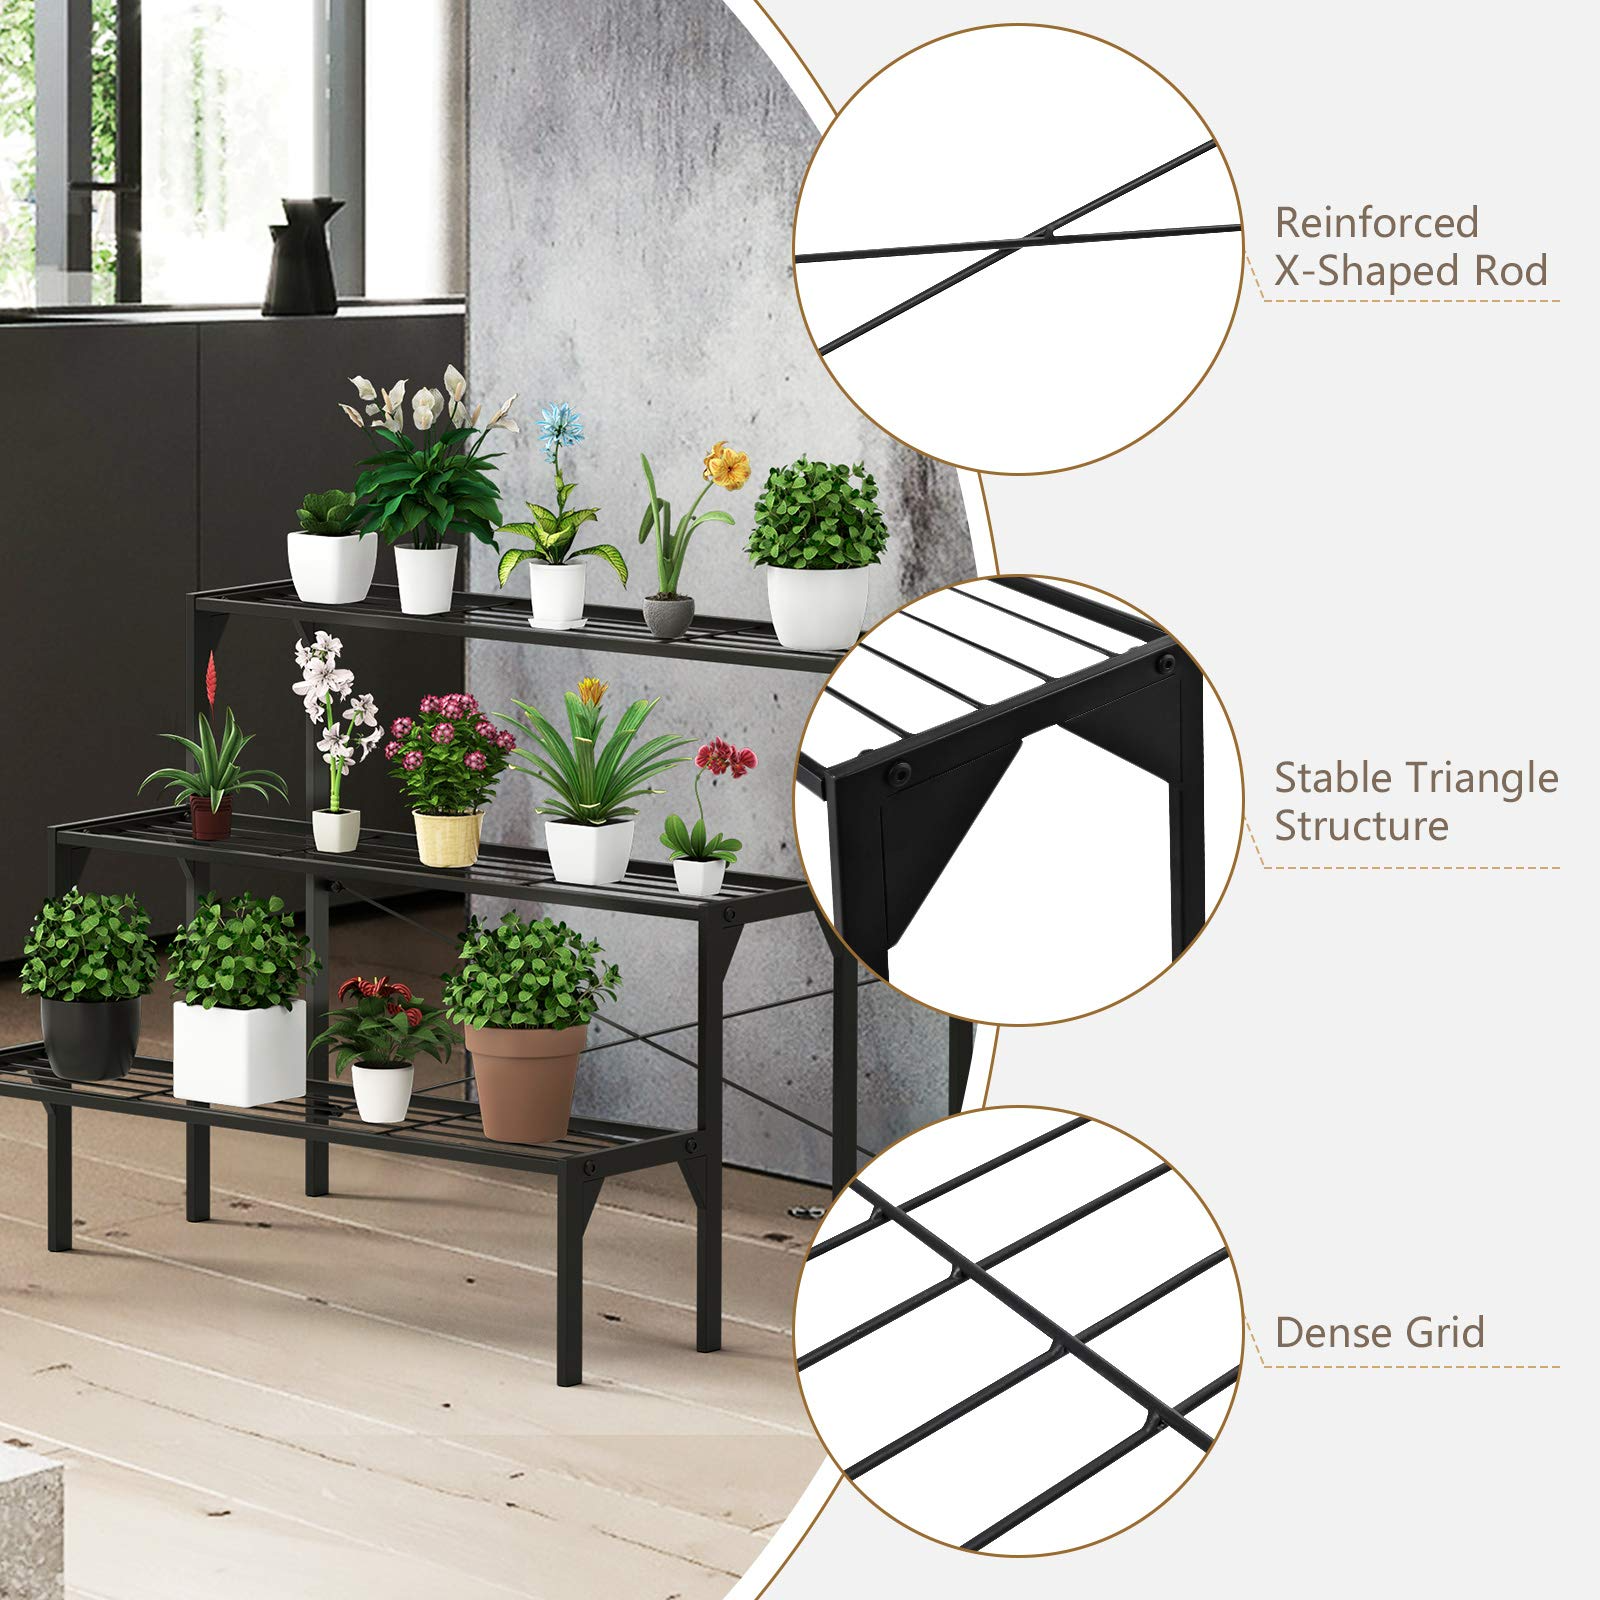 Giantex 3 Tiers Metal Plant Stand